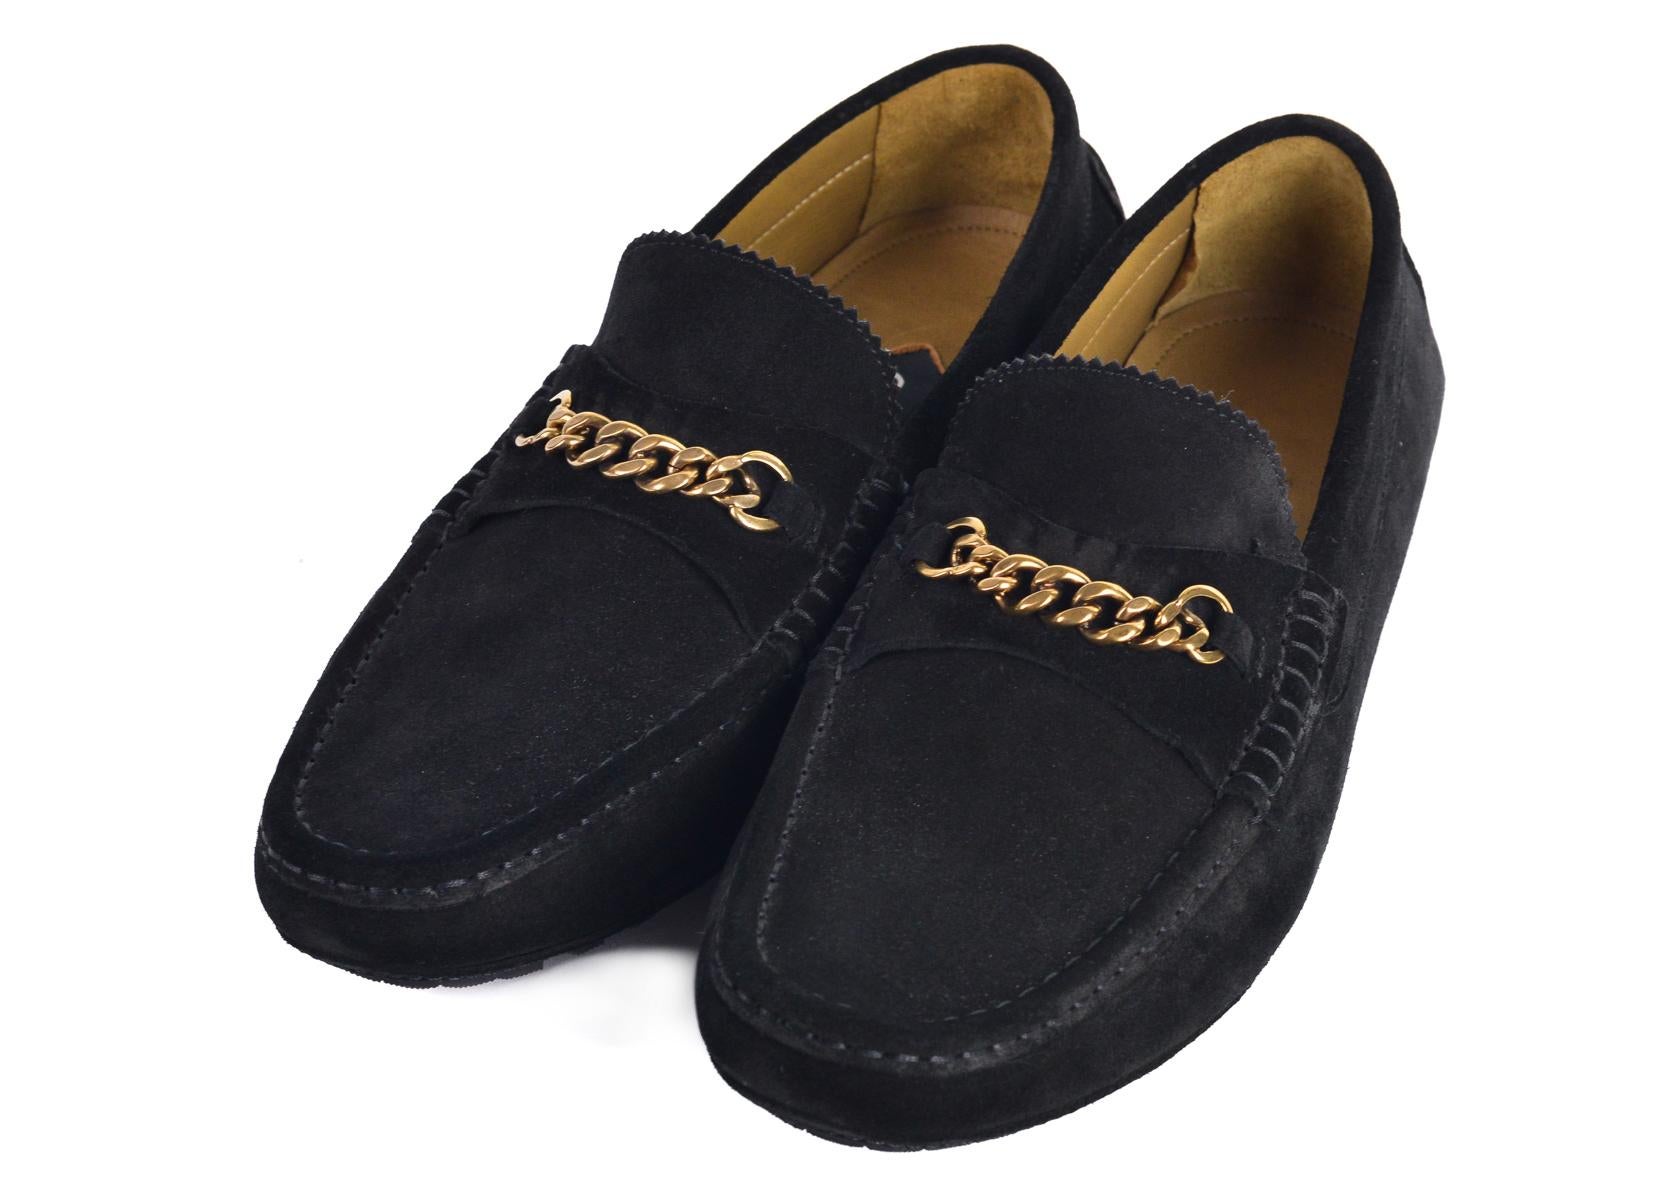 Tom Ford Mens Black Suede York Chain Drivers Loafers im Zustand „Neu“ im Angebot in Brooklyn, NY